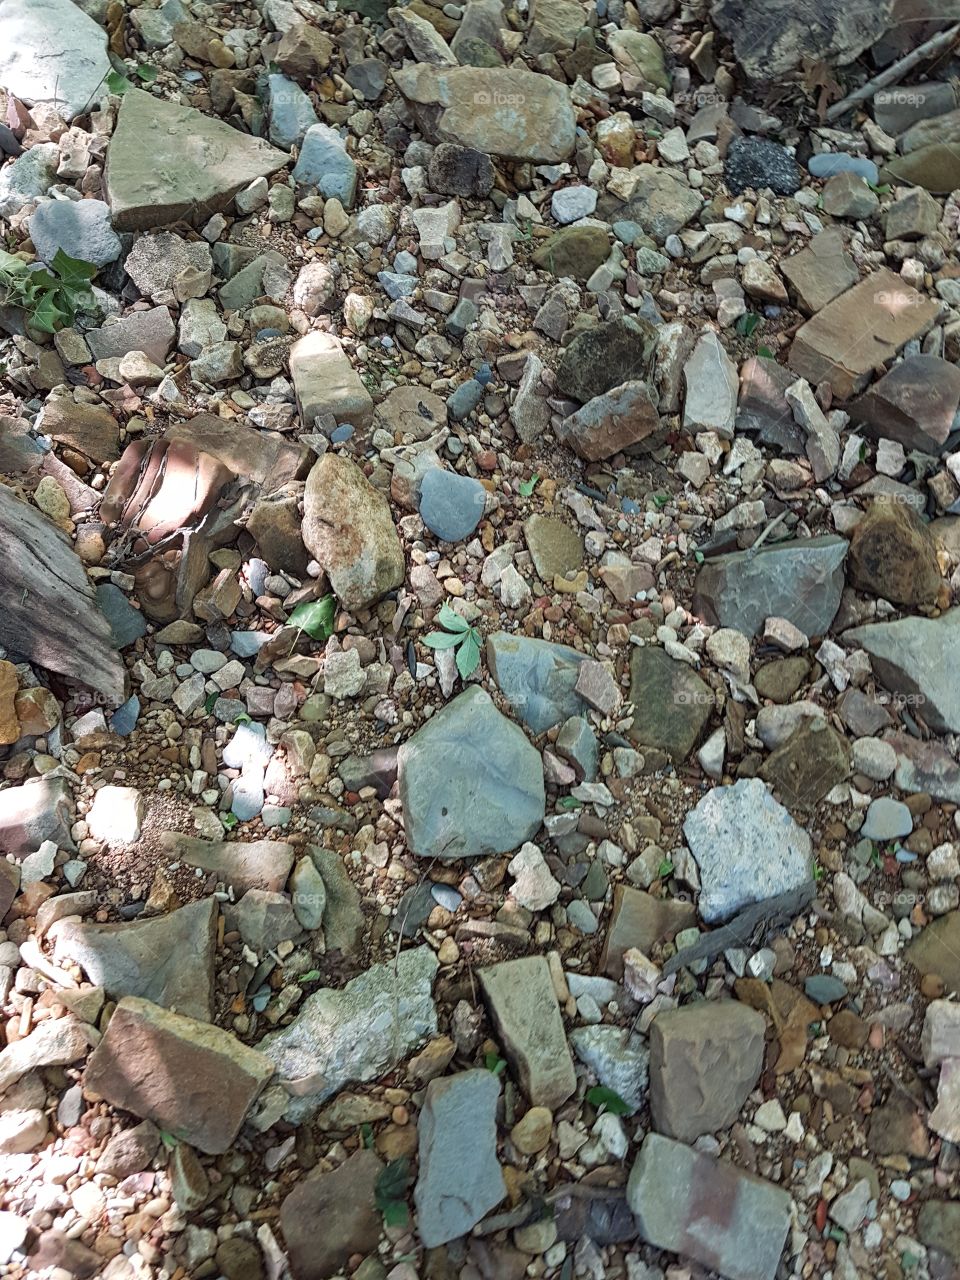 Eclectic collection of colorful rocks in dry creekbed with scattered green plants poking through.